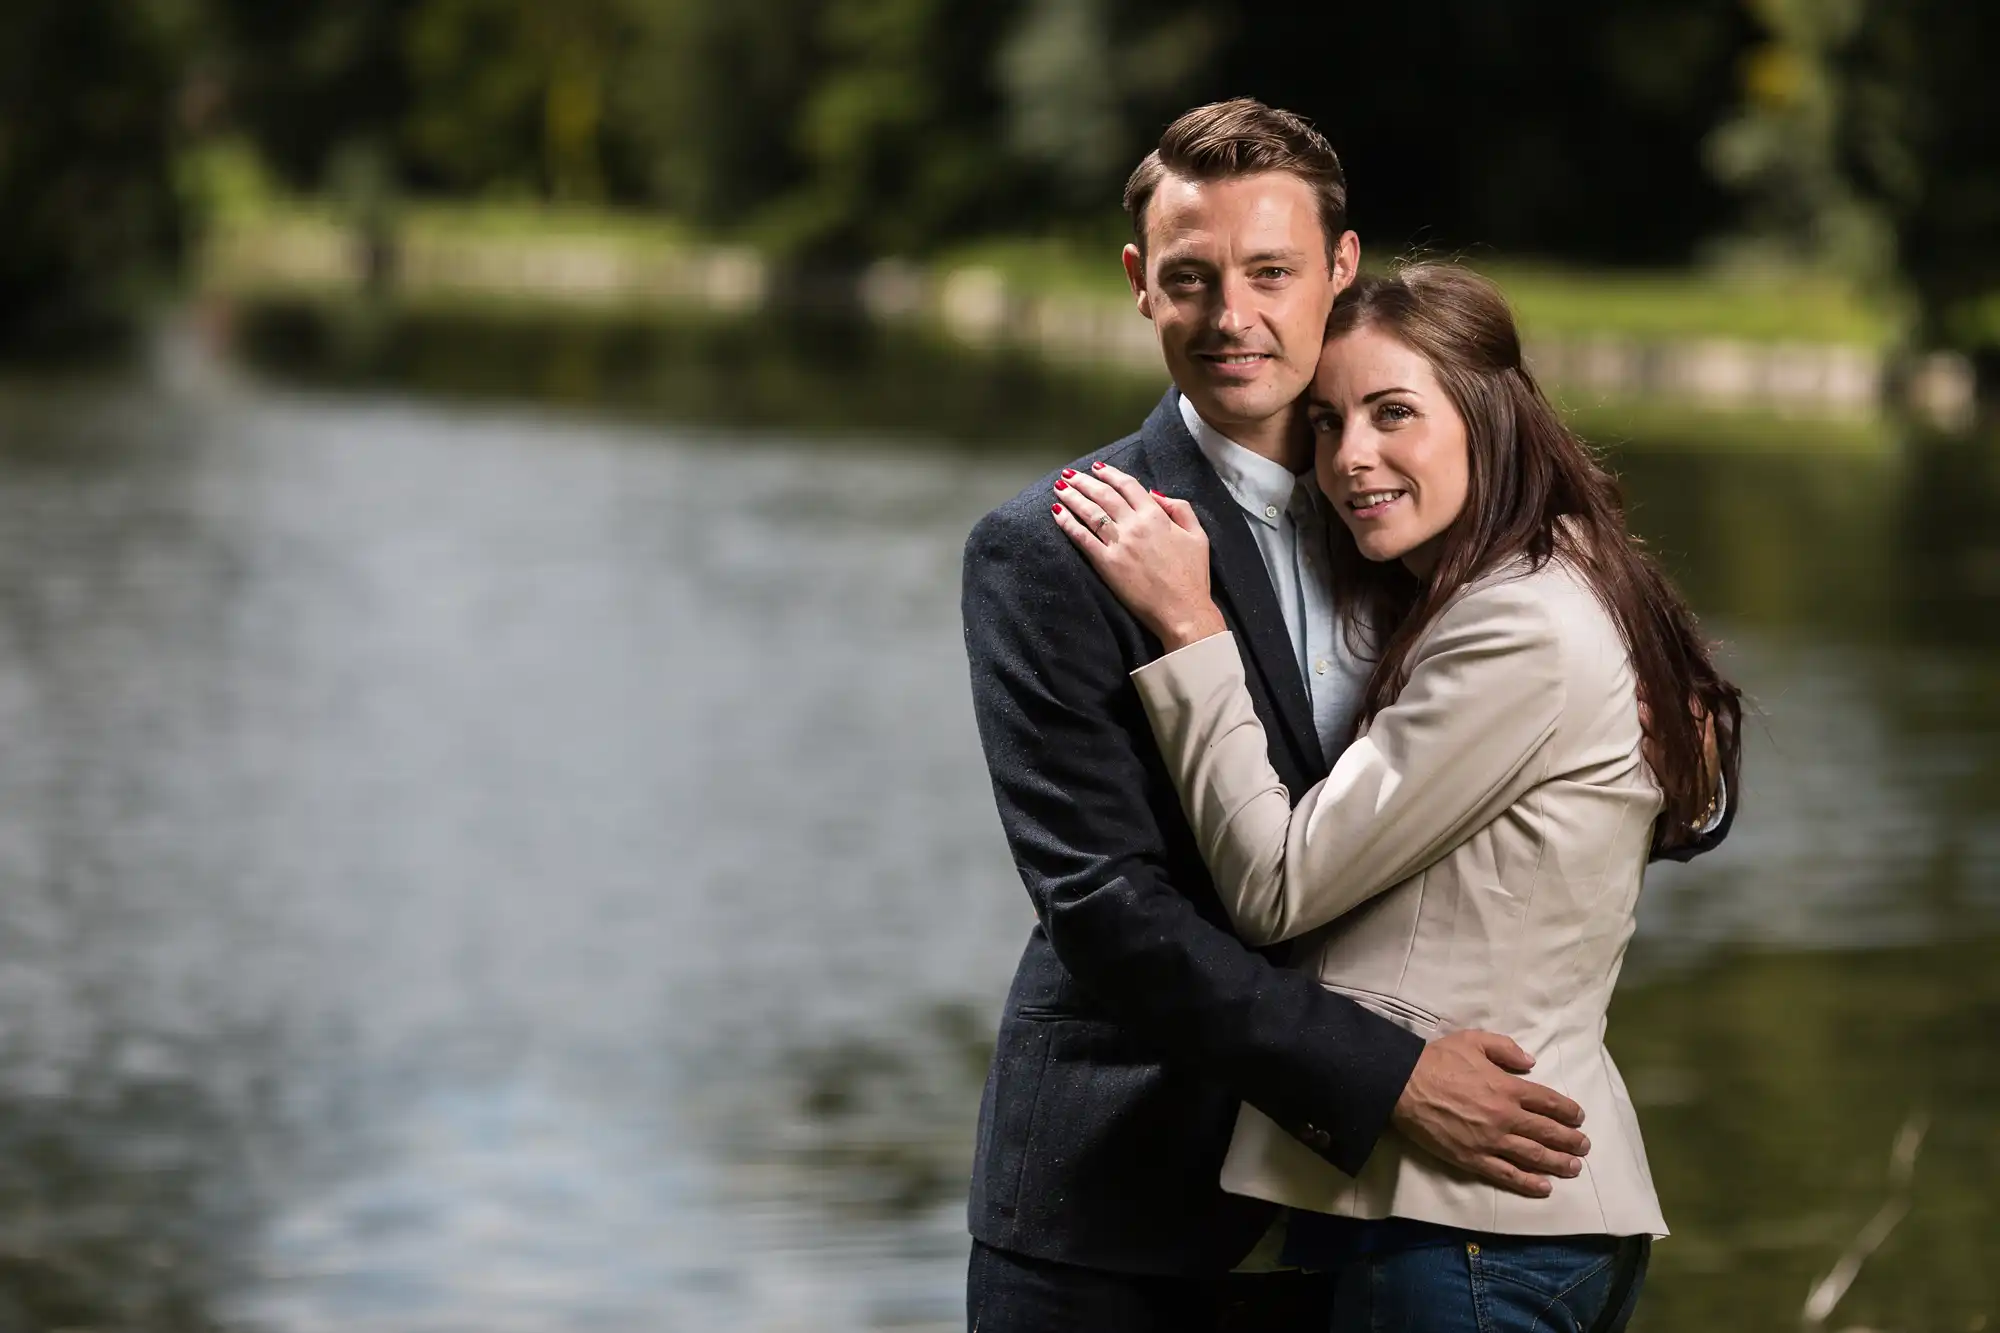 A couple embracing affectionately by a tranquil lake. the man, in a suit, smiles at the camera while the woman, in a beige jacket, rests her head on his chest.